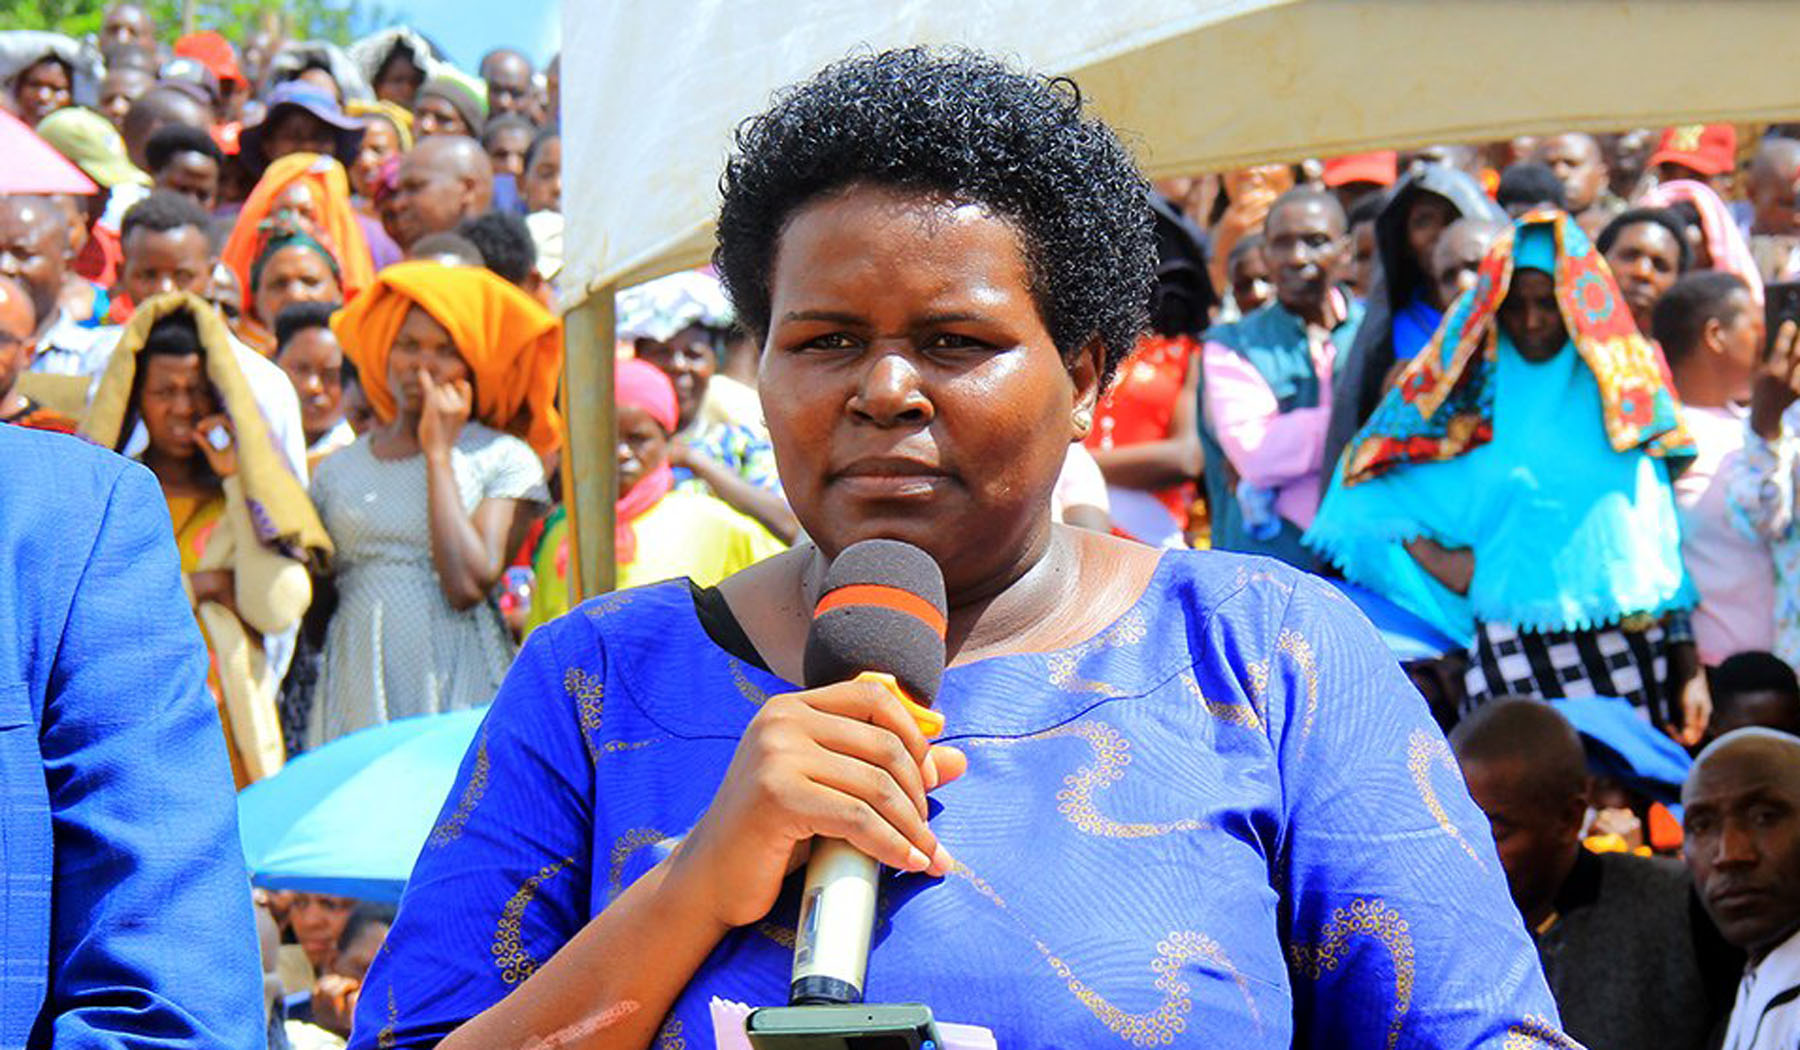 The Rubanda District Woman MP’s Grandfather the late Elidad Kakombe, has been laid to rest.